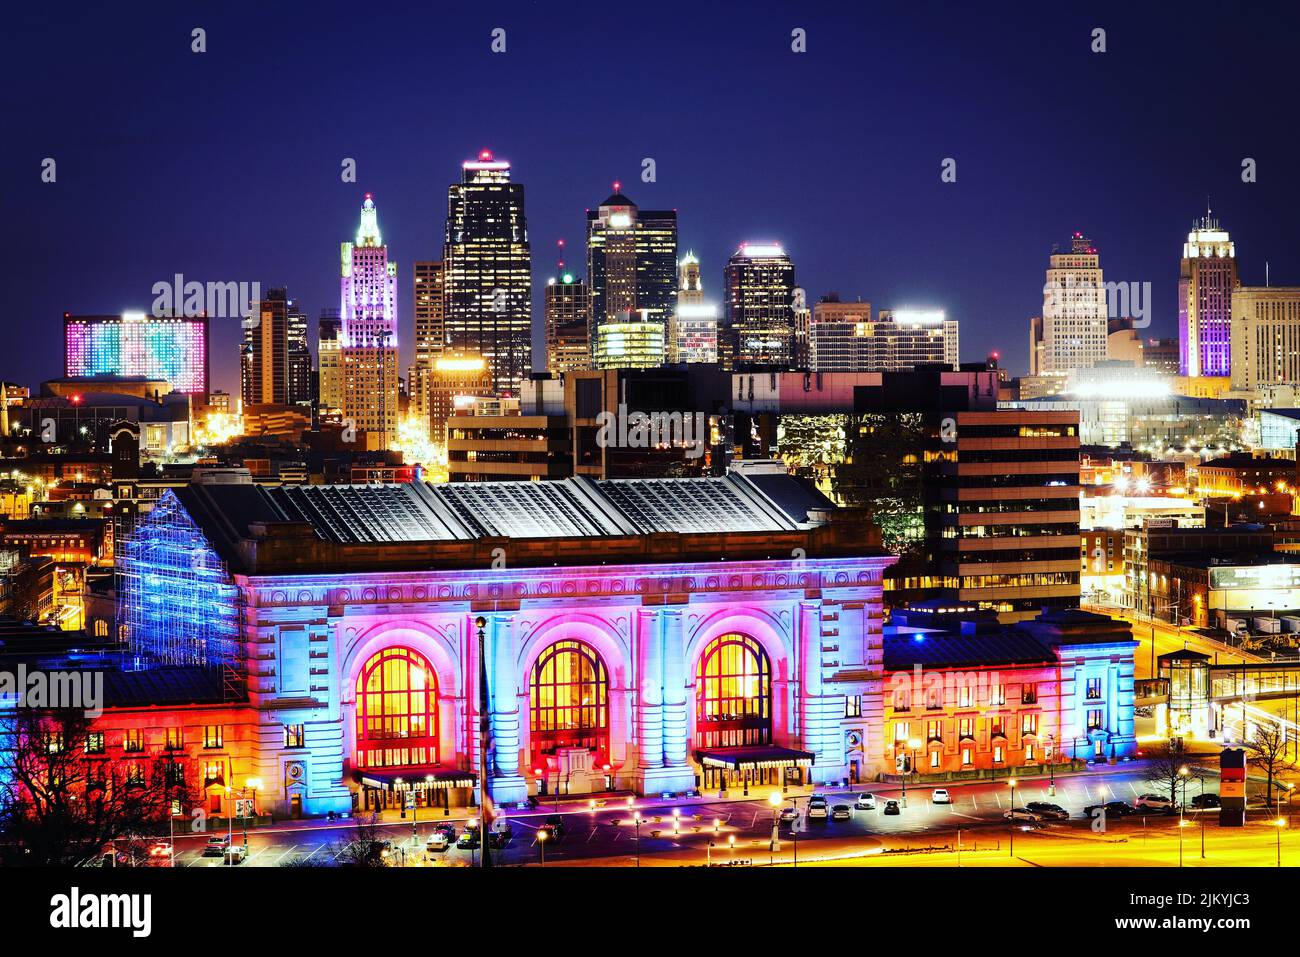 A beautiful shot of Union Station and sky scrappers against dusk sky in Kansas City, Missouri, United States Stock Photo